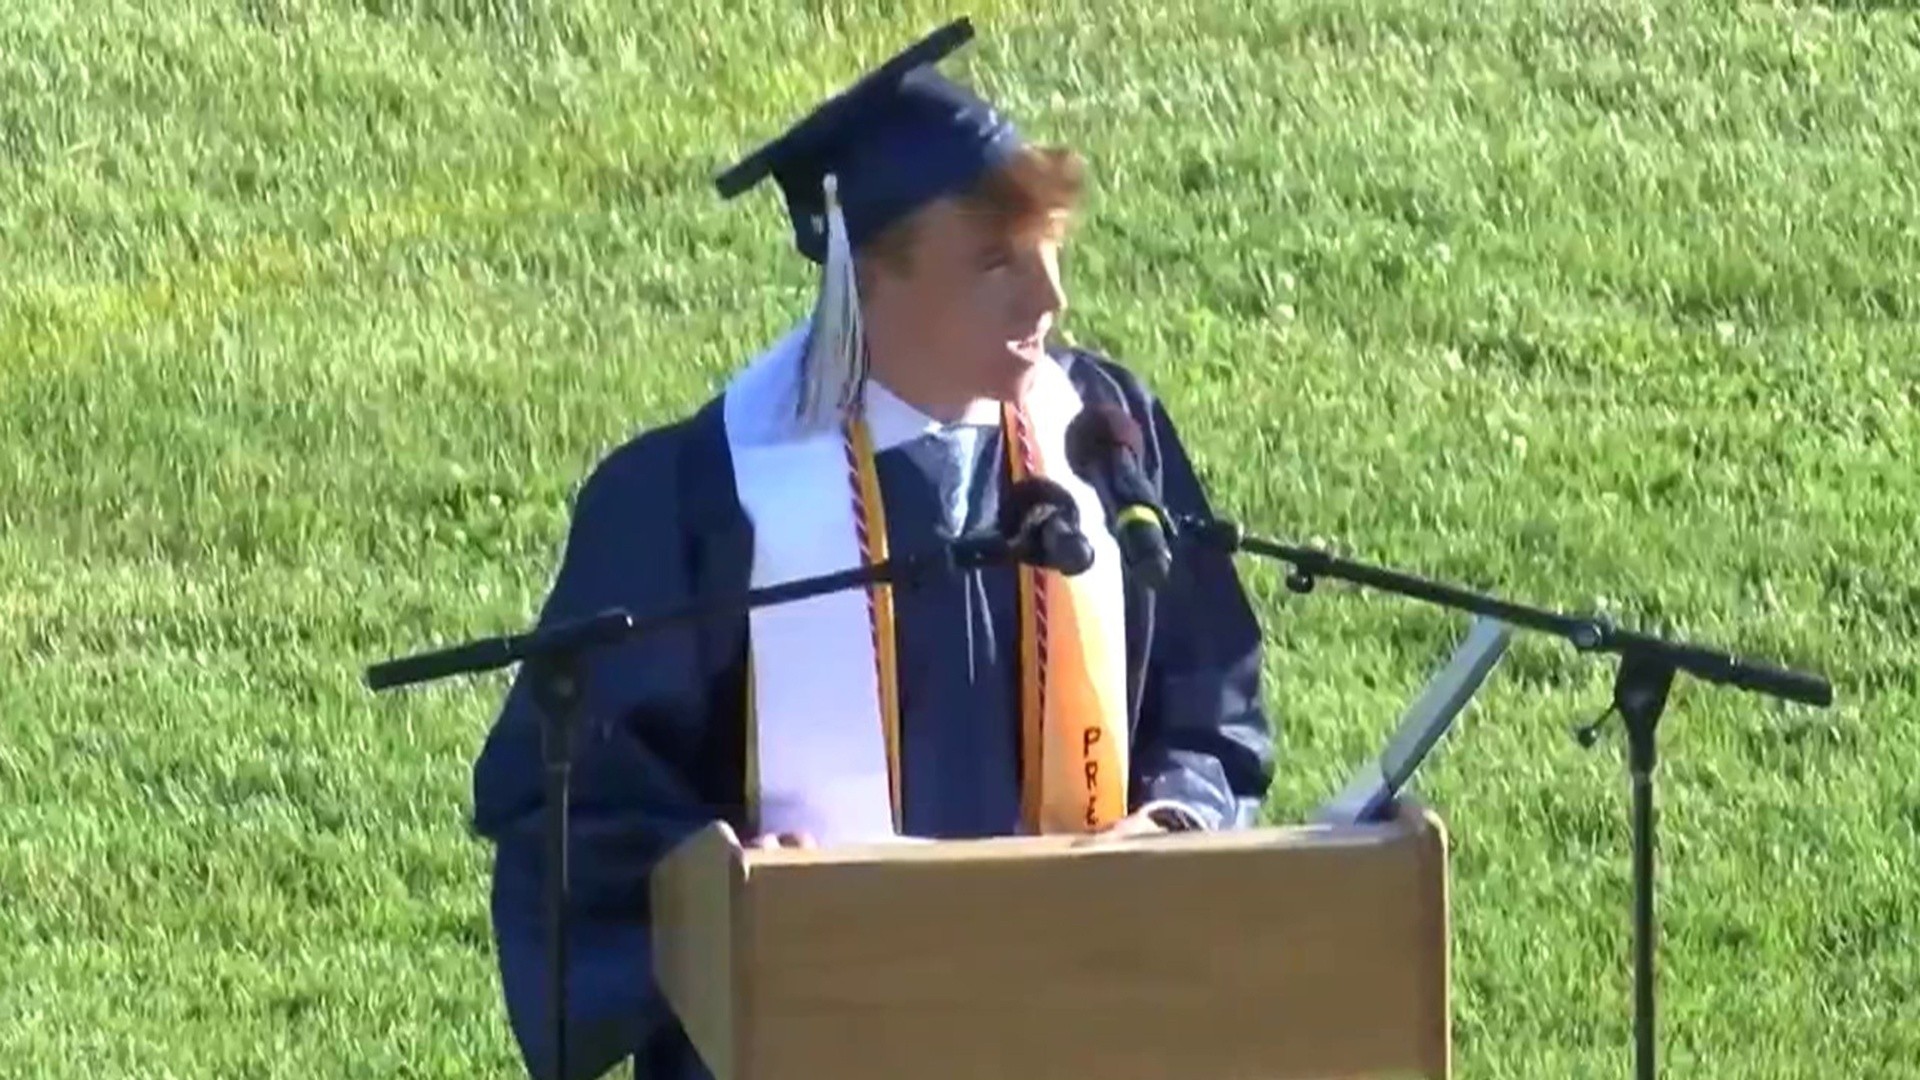 Class president writes personal note to all 180 fellow graduates